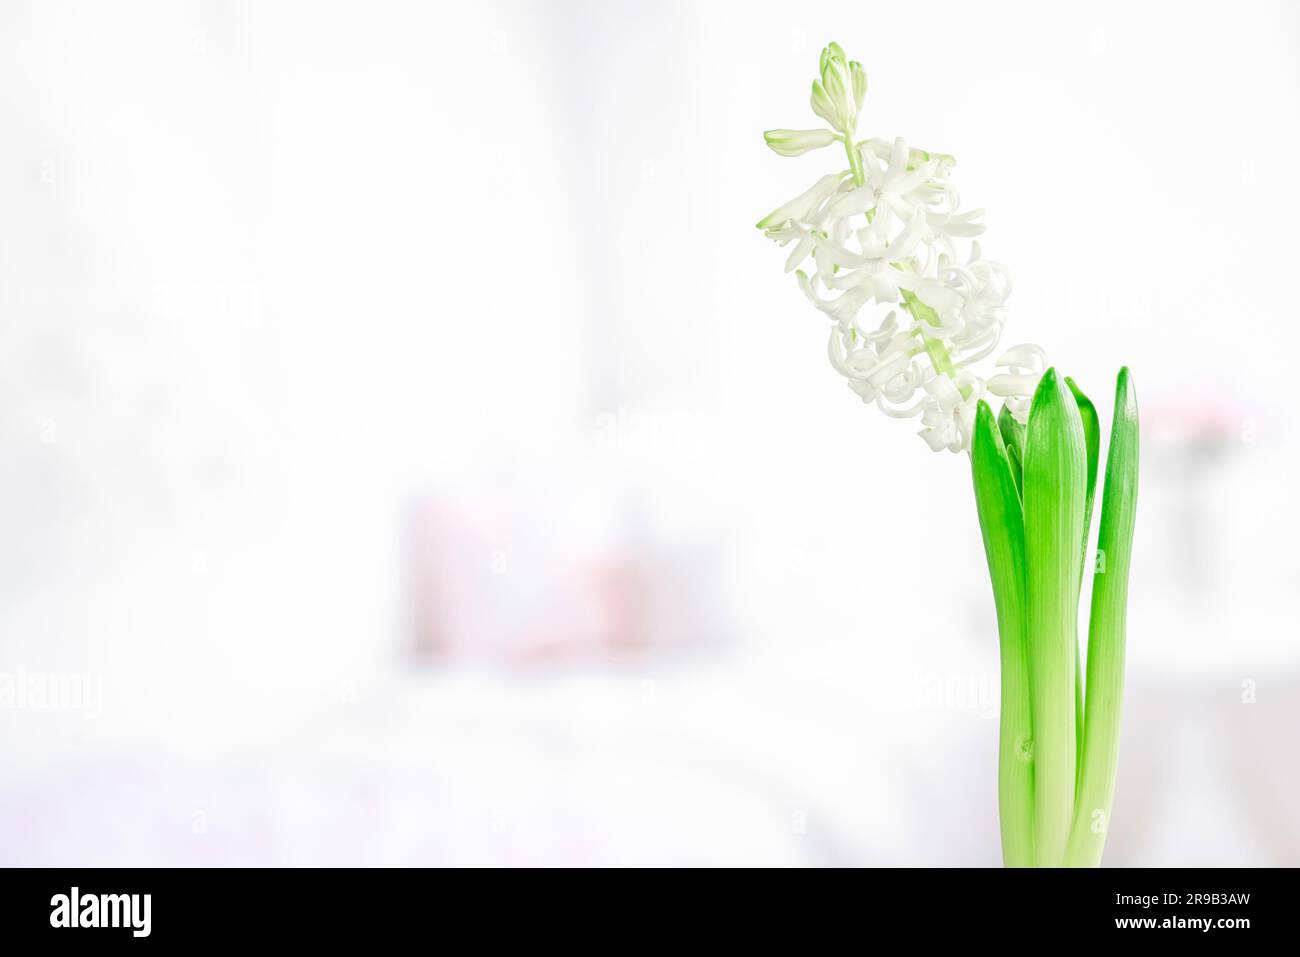 Blooming white hyacinth flower with green leaves Stock Photo